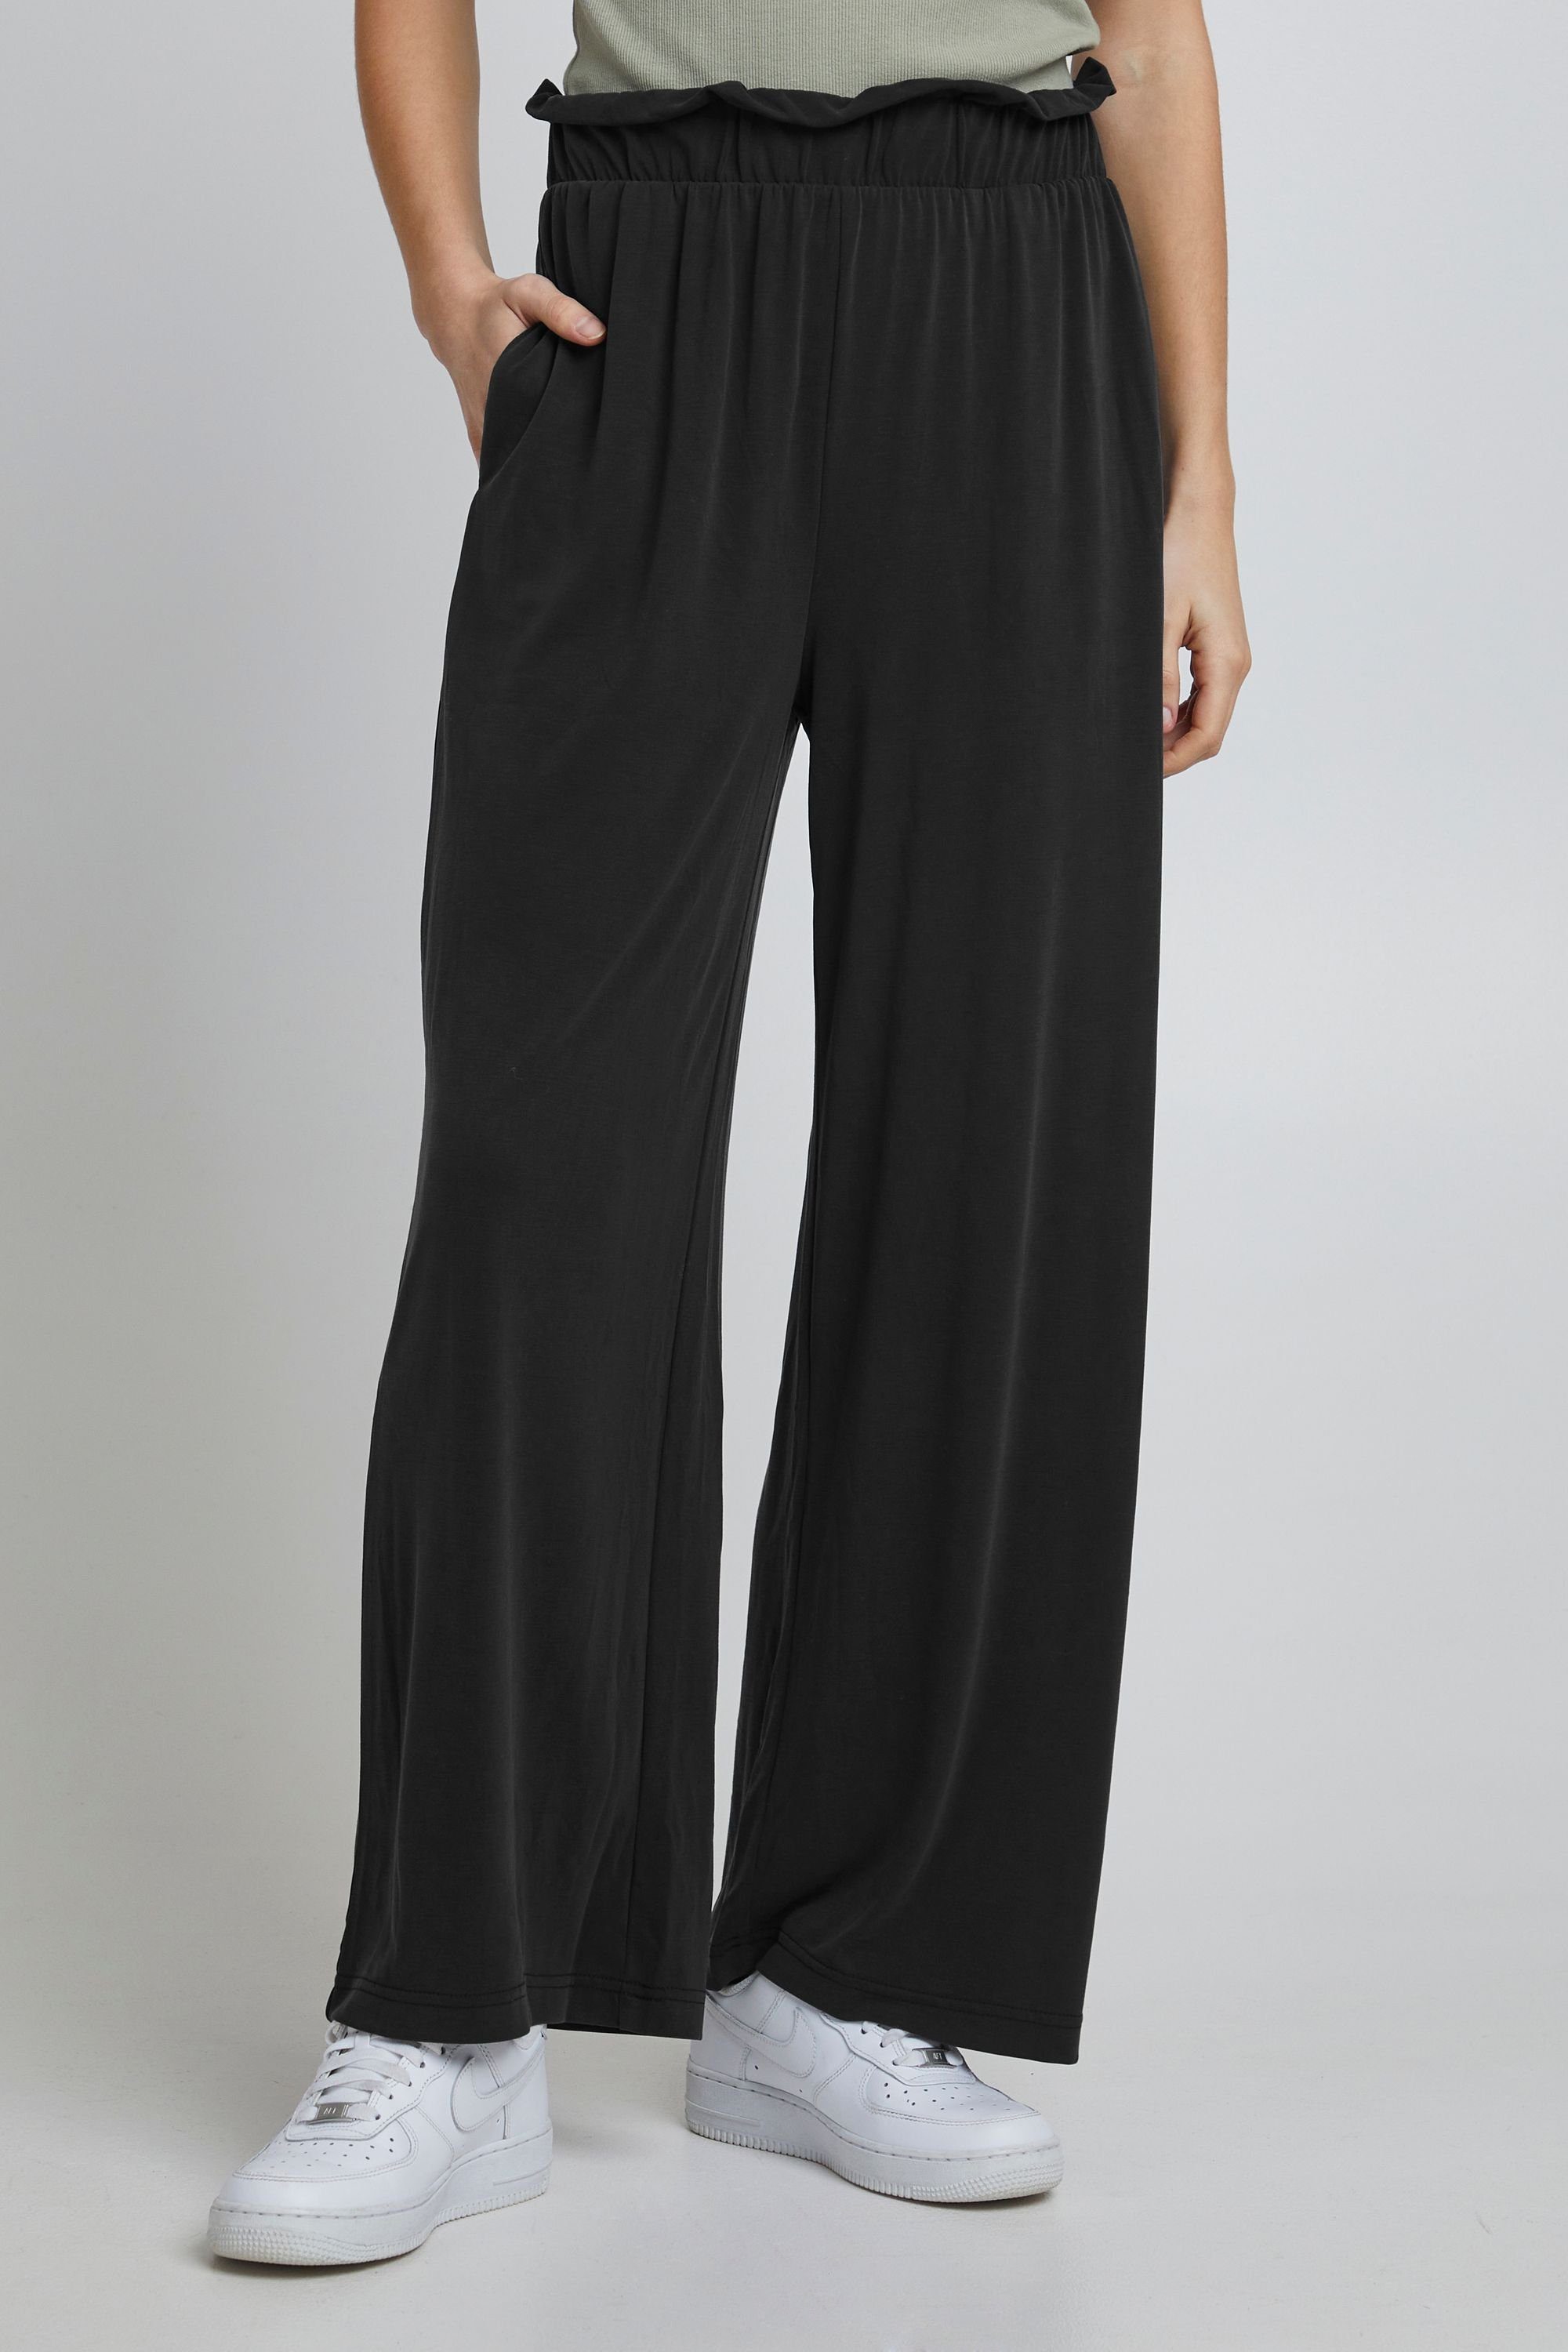 Black (200451) b.young Stoffhose -20811288 PANTS BYPERL